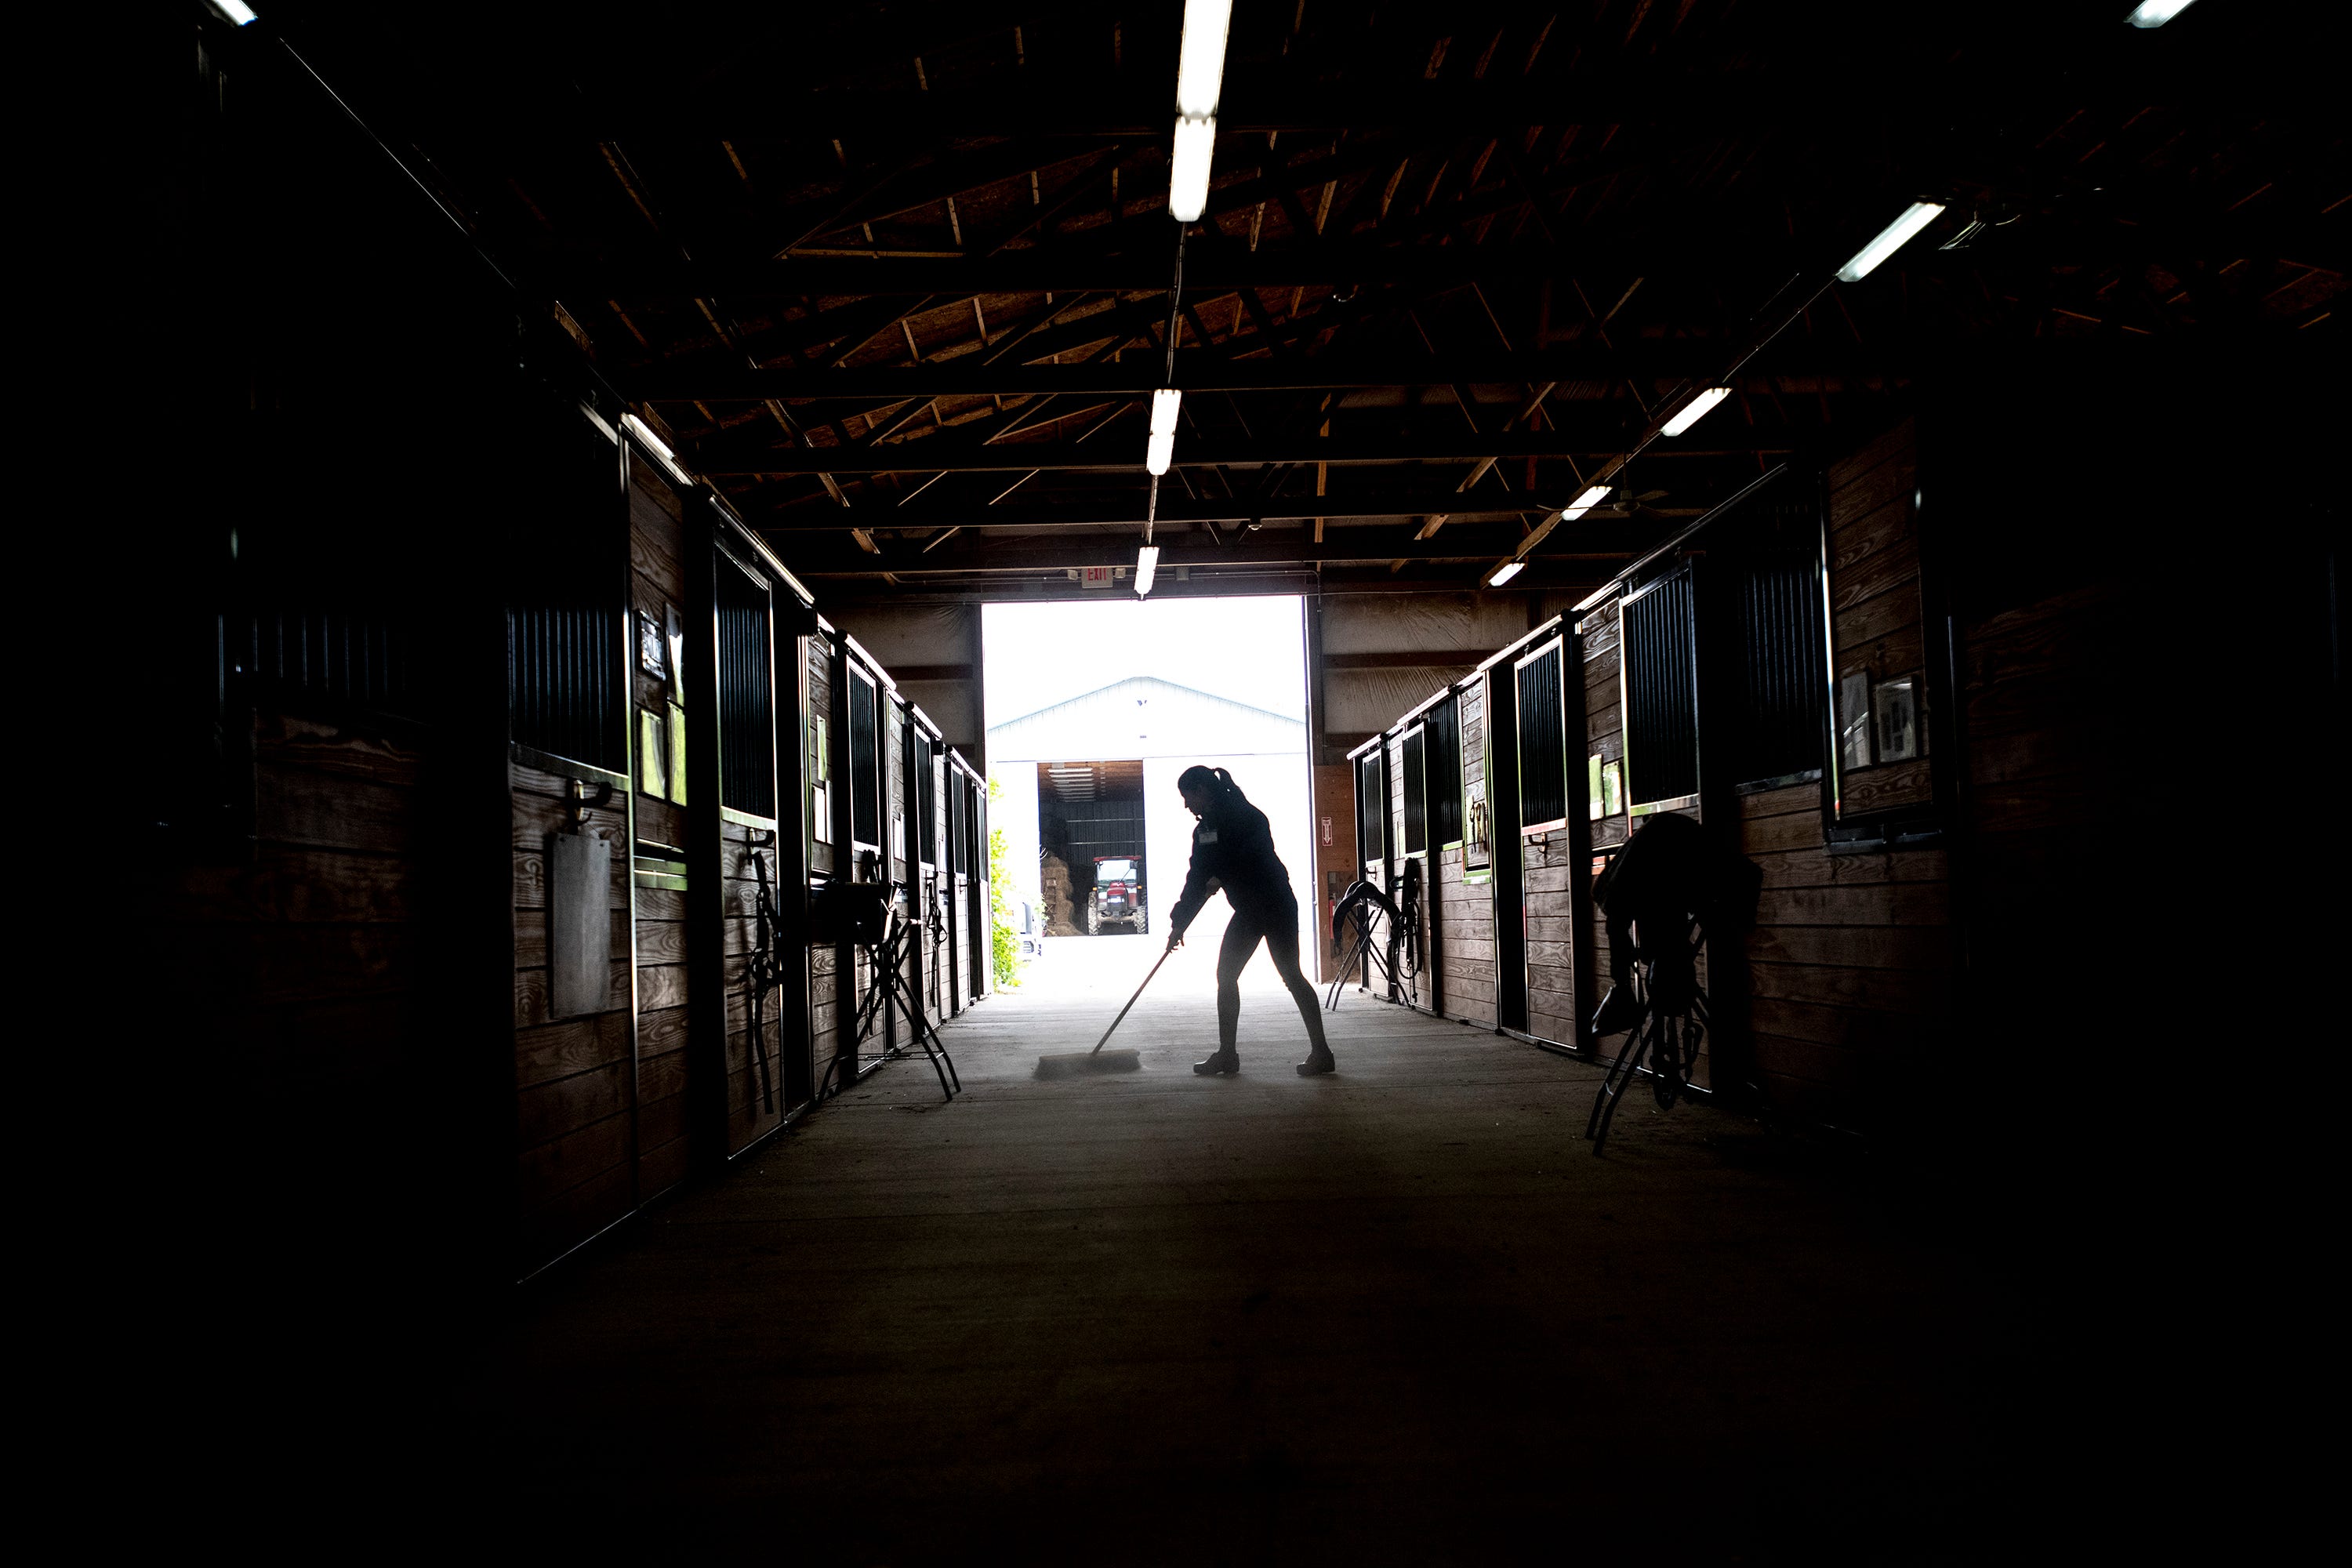 Volunteer Tatiana Bernstein sweeps up the stable floor following Tuesday morning's riding session at Therapeutic Riding Inc. in Ann Arbor.